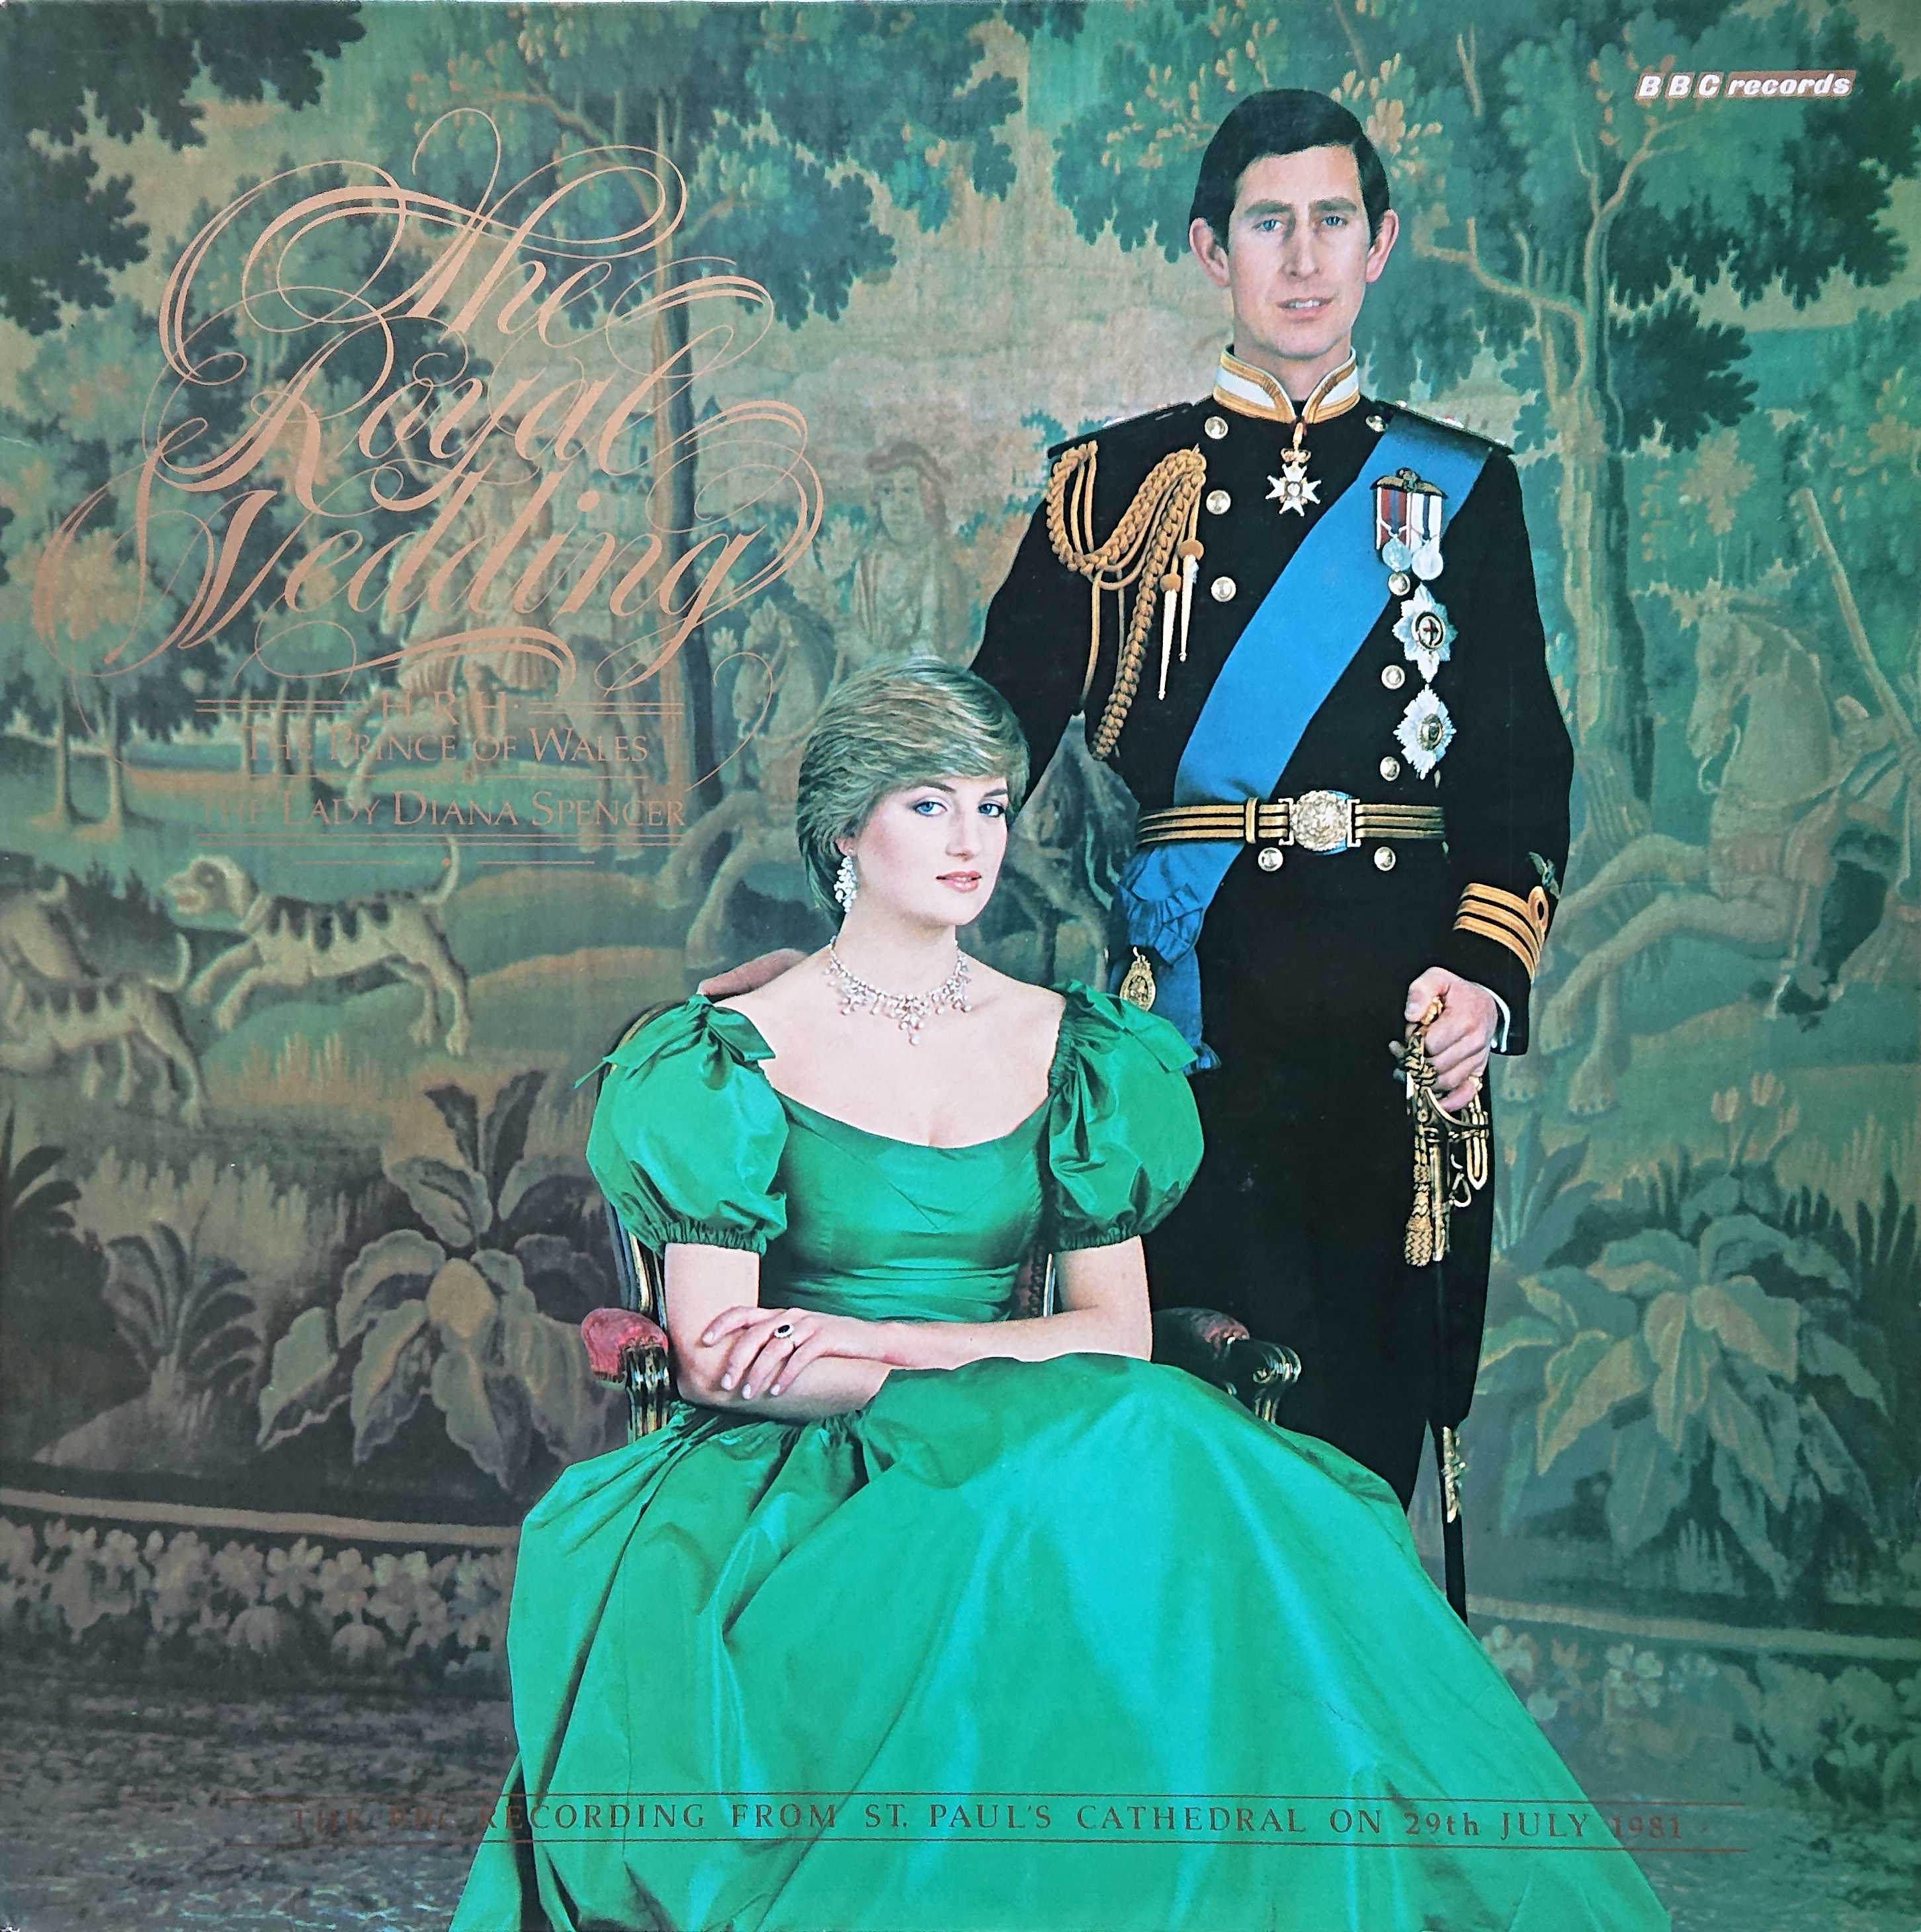 Picture of REP 413-iD The royal wedding - Prince Charles / Diana Spencer by artist Various from the BBC albums - Records and Tapes library